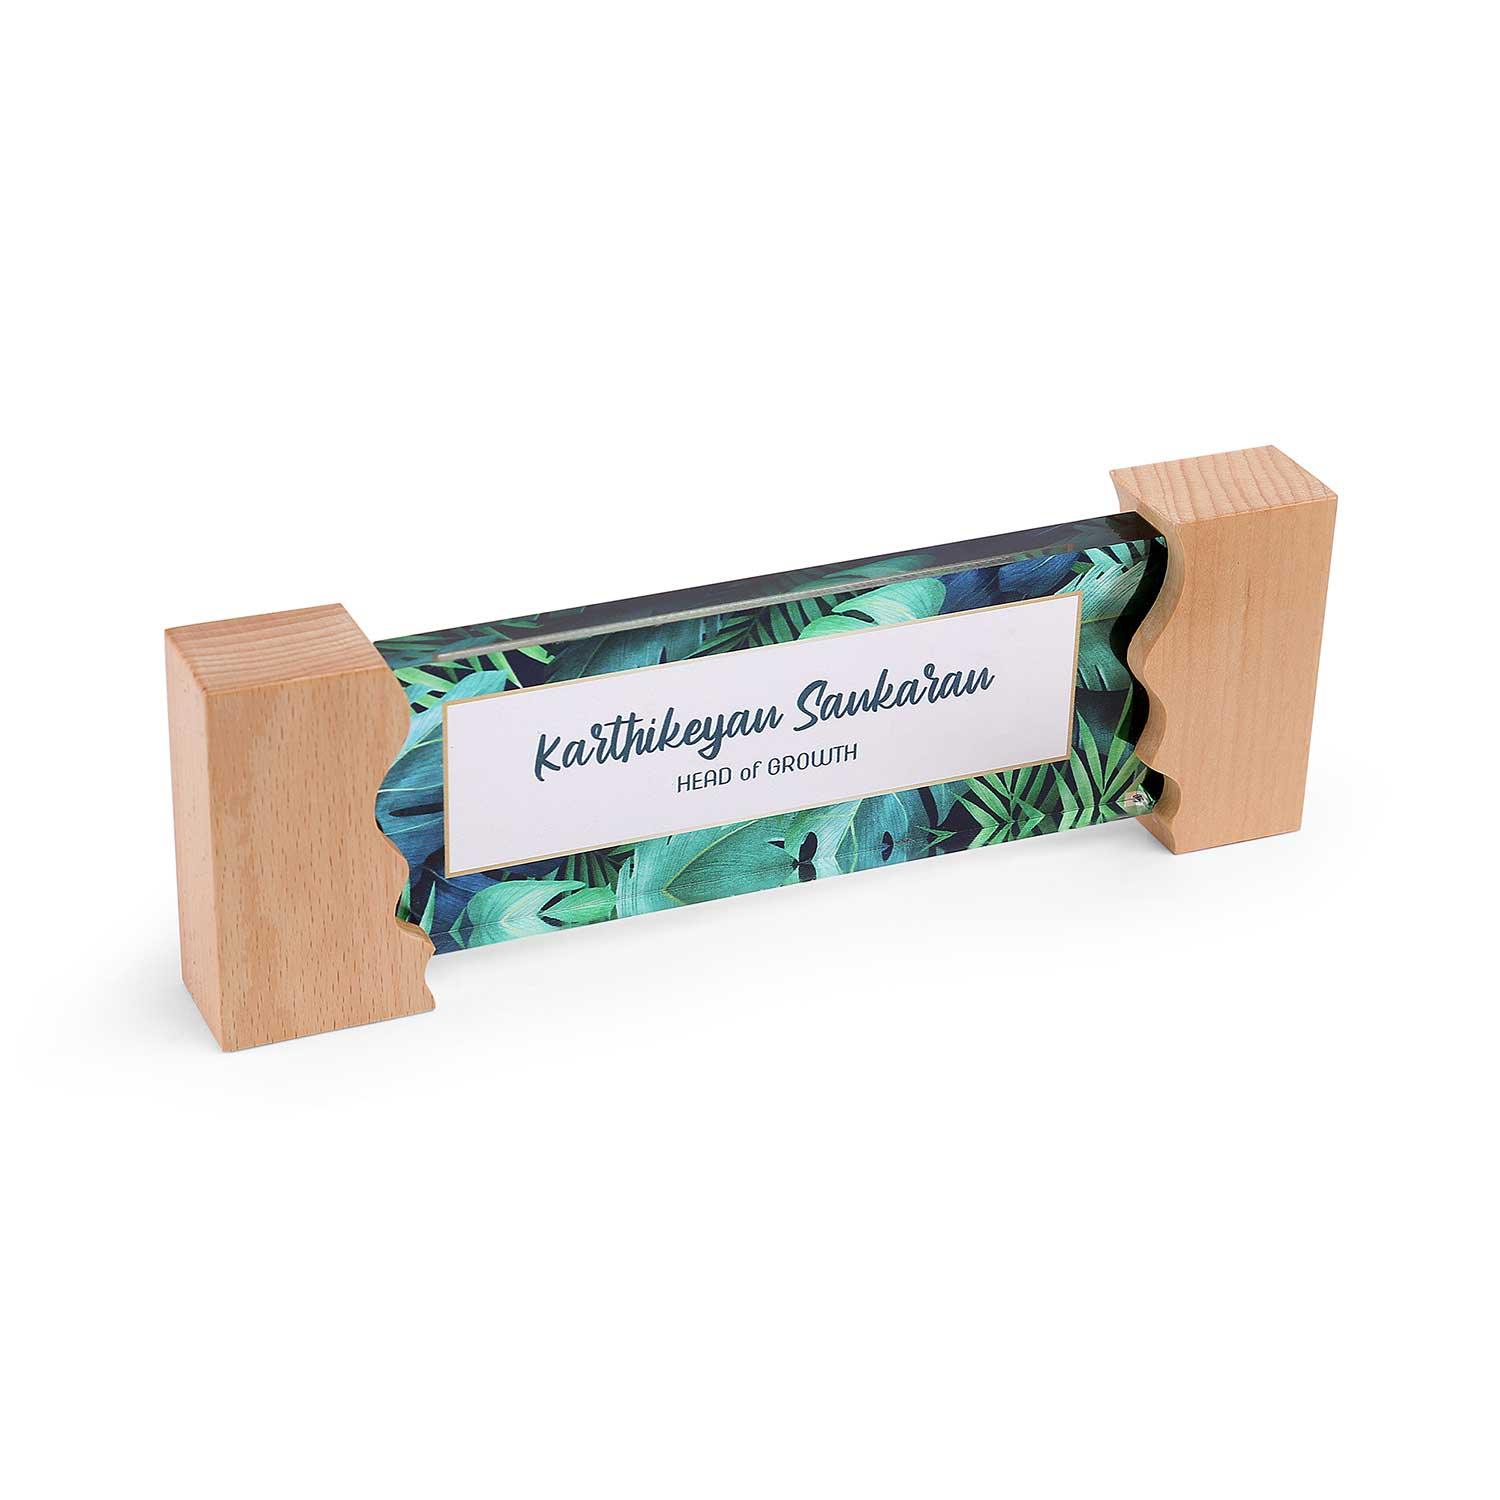 Foliage Desk Name Plate with Wooden Stand - Housenama